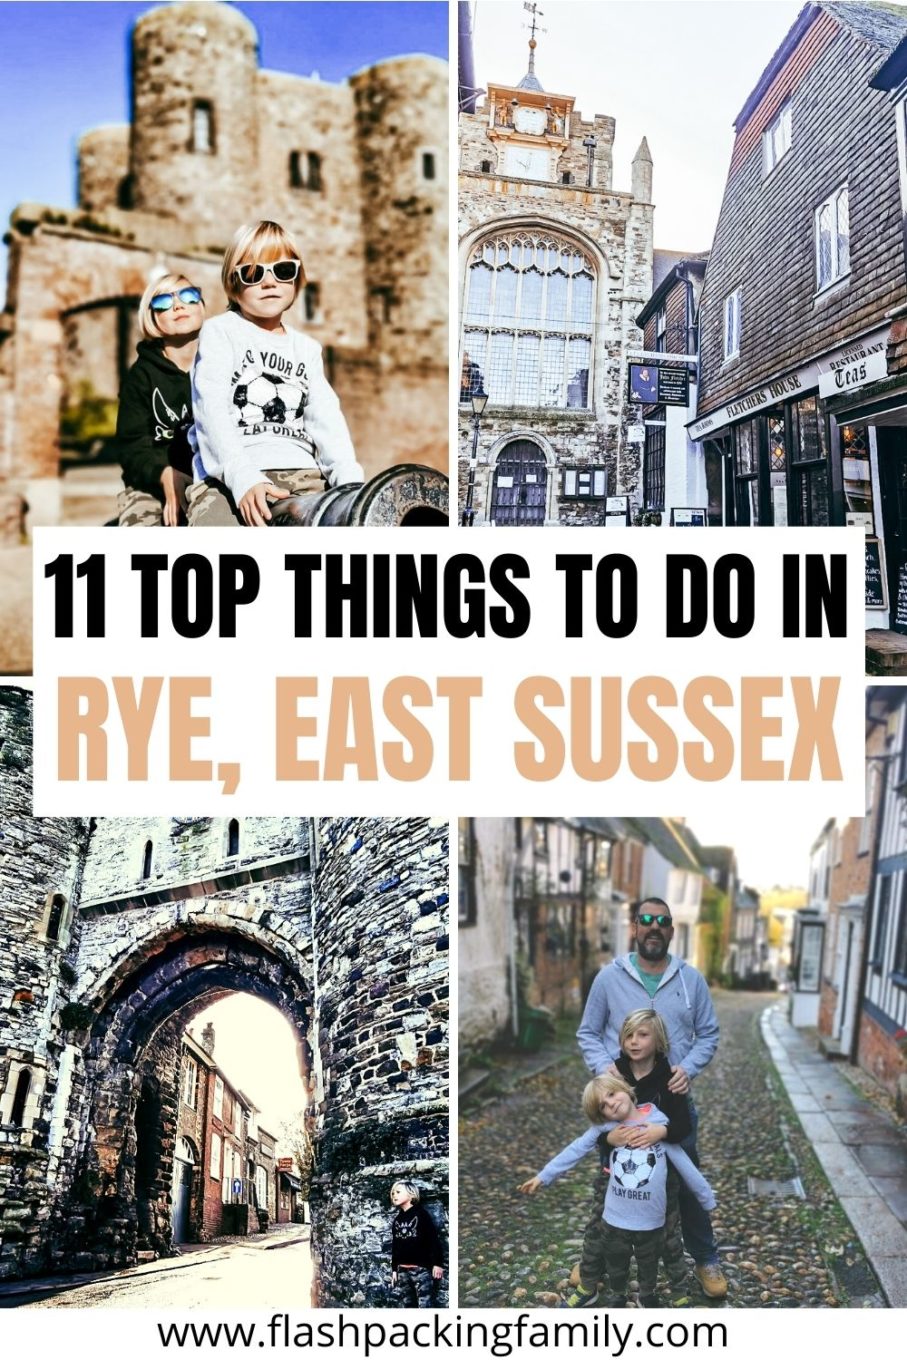 11 Top Things To Do in Rye, East Sussex